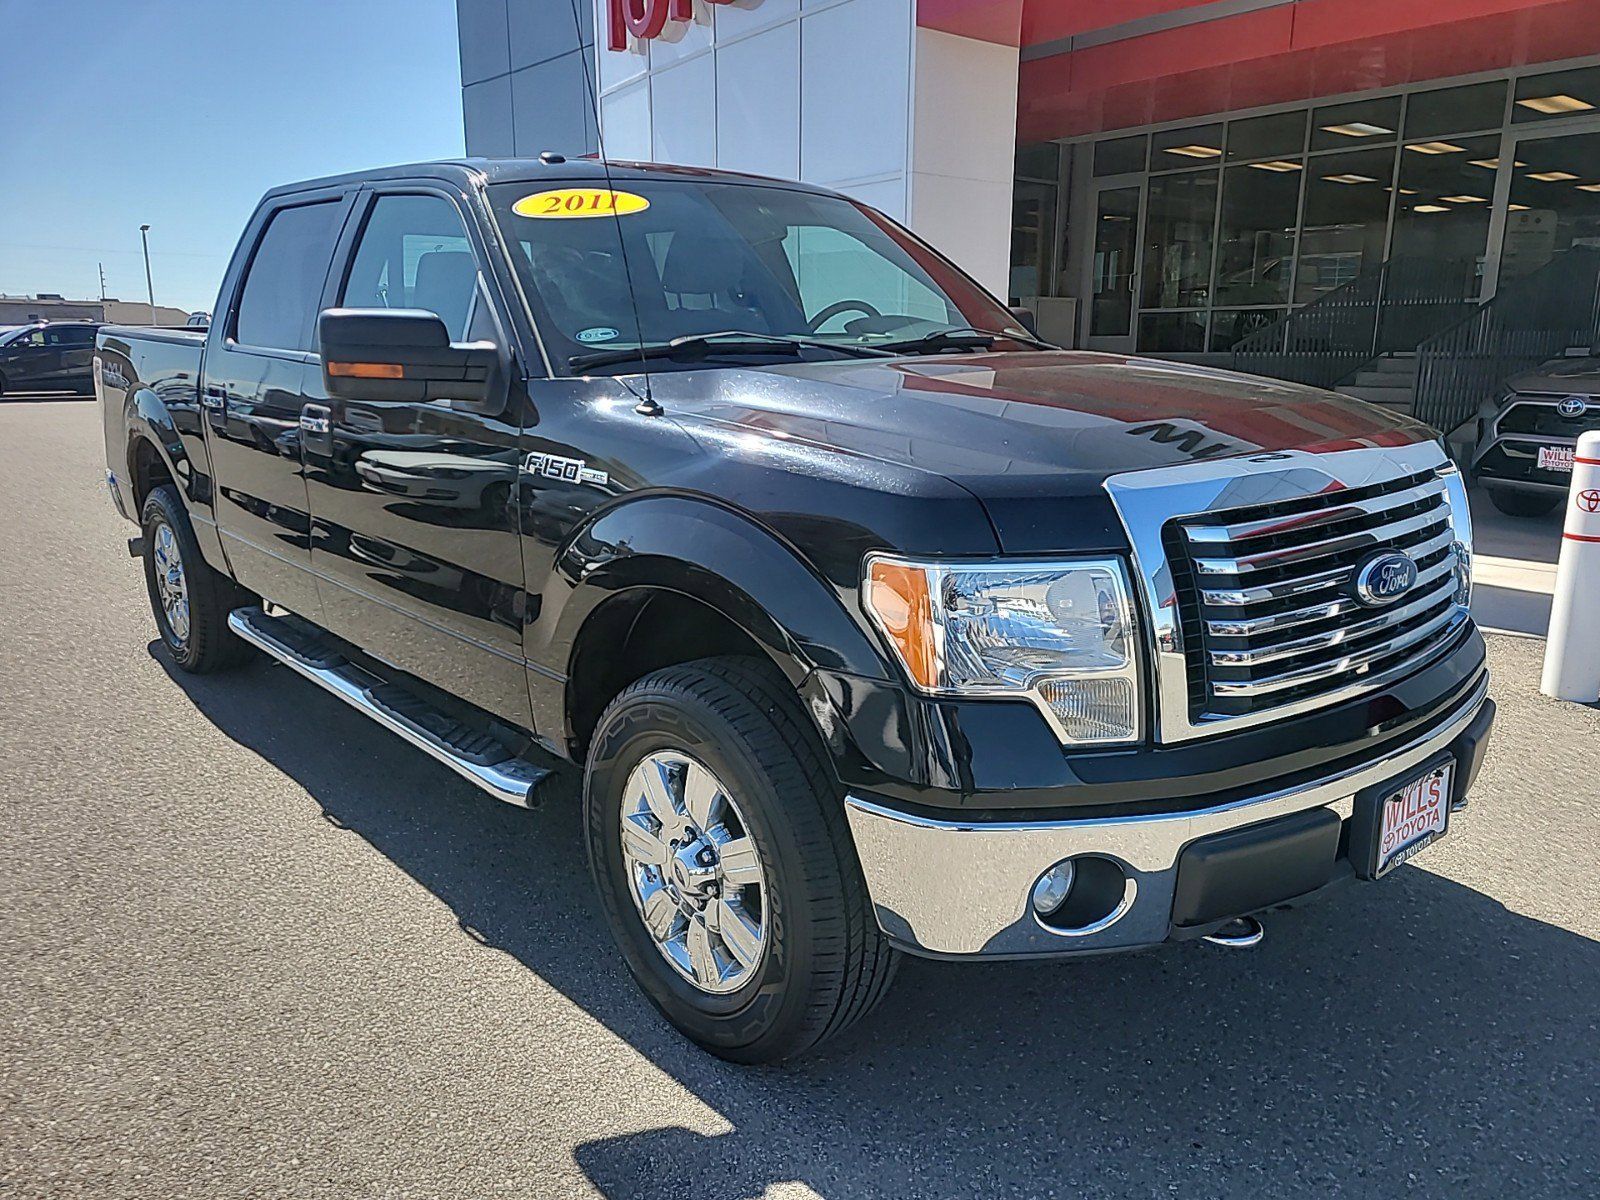 2011 - Ford - F-150 - $7,697